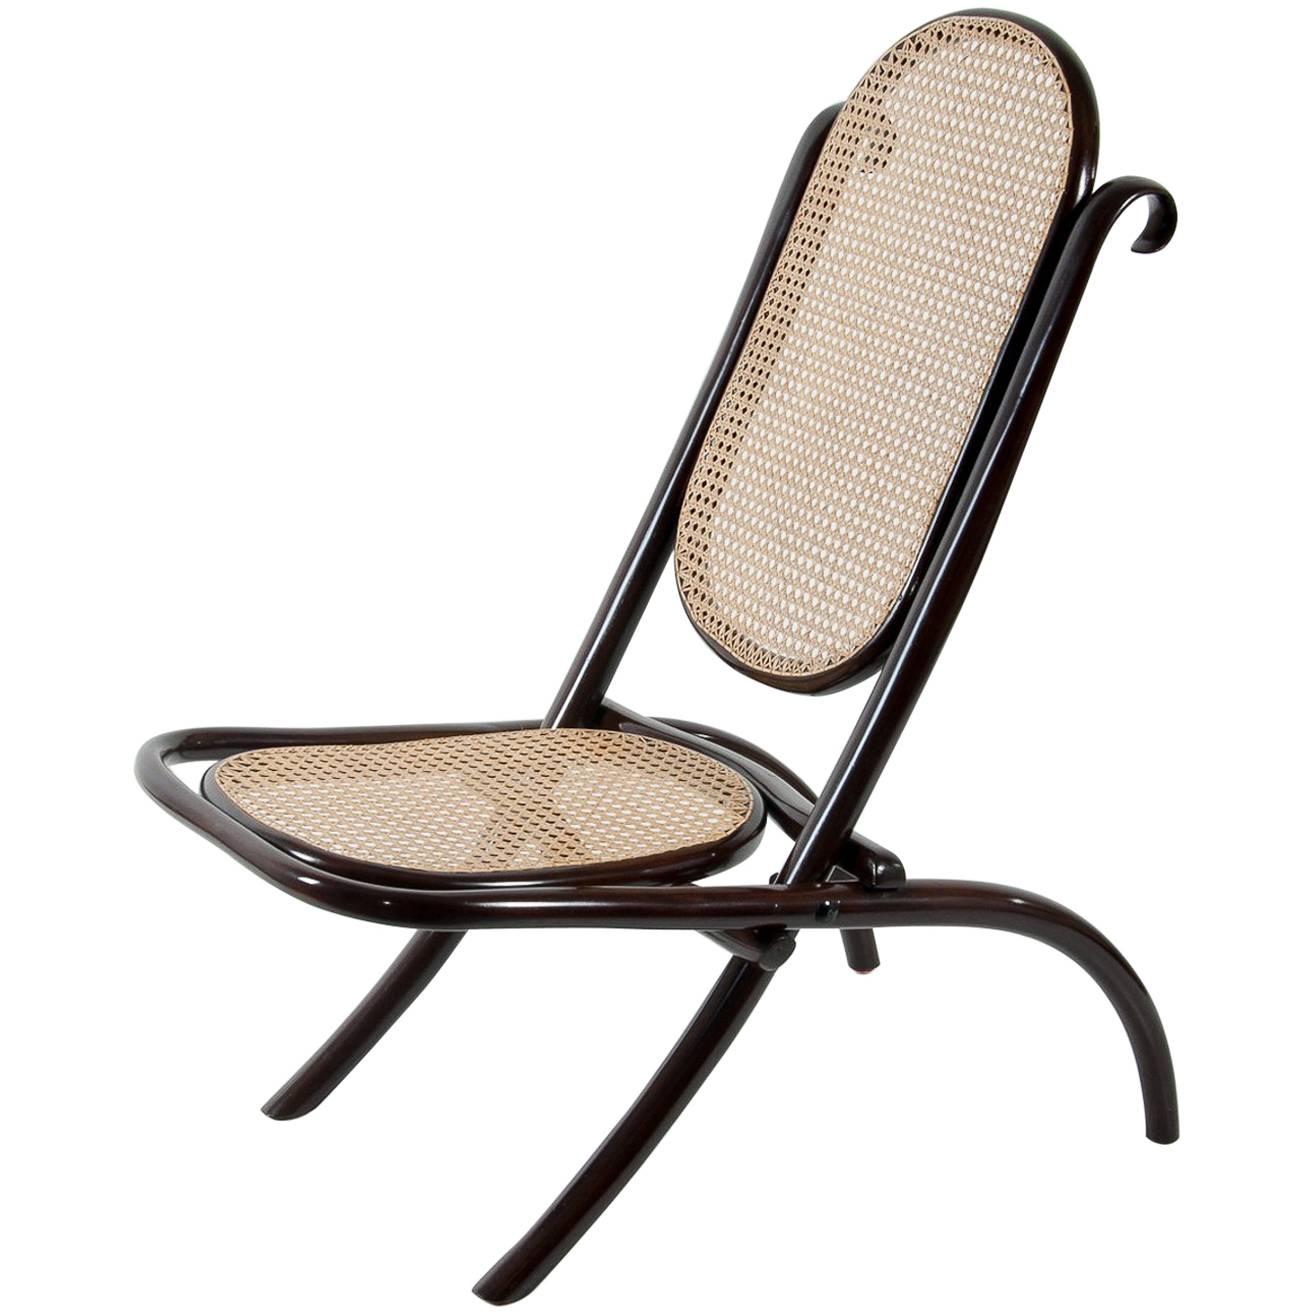 Thonet "Caminsessel" / Fire Place Chair No. 1 For Sale